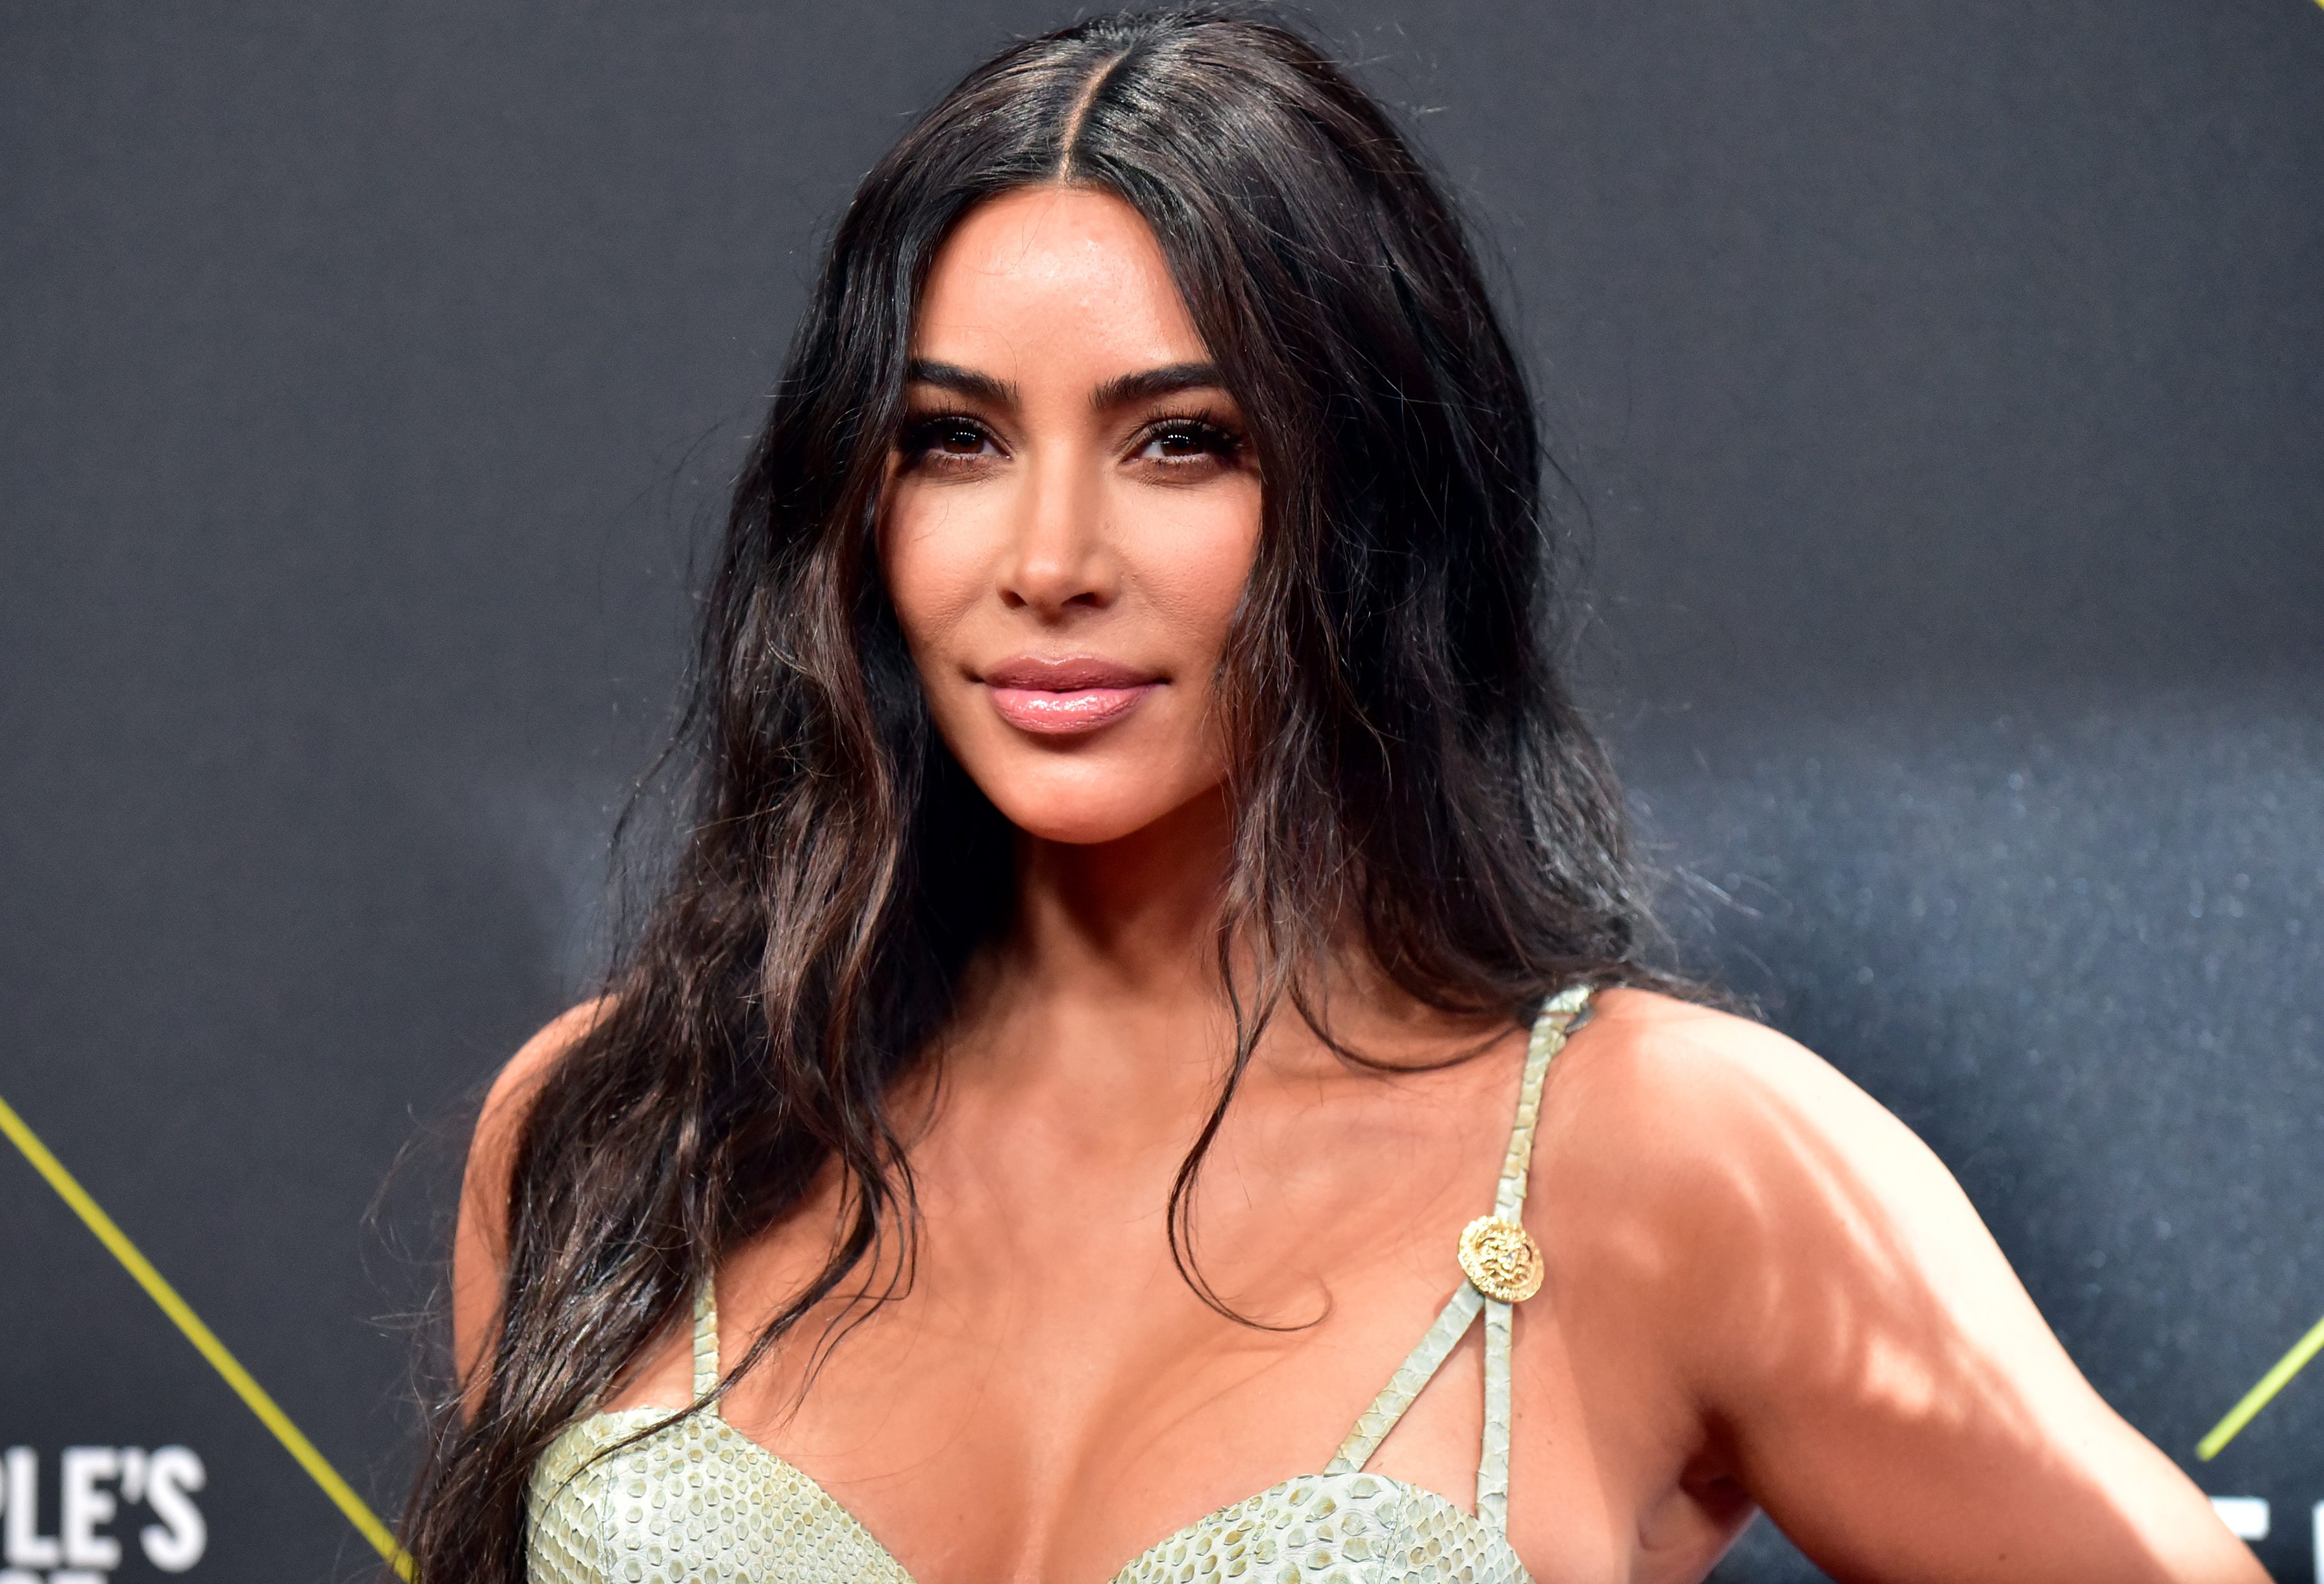 Kim Kardashian attends the 2019 E! People's Choice Awards on Nov. 10, 2019 in Santa Monica, California. (Rodin Eckenroth—WireImage/Getty Images)